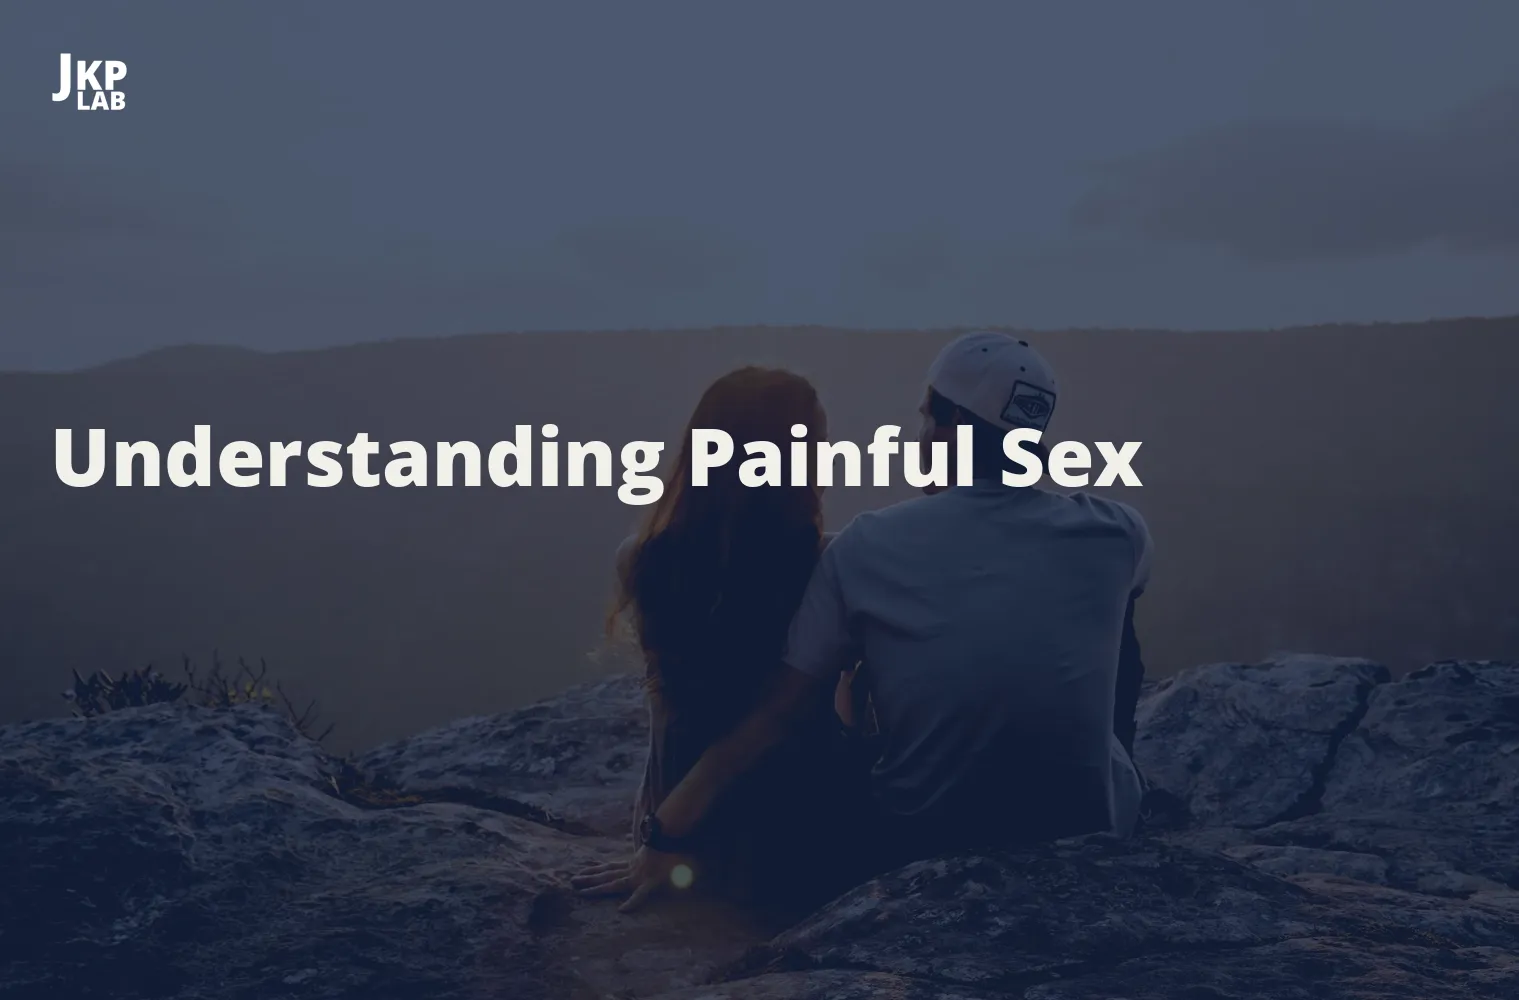 Endometriosis and Painful Sex